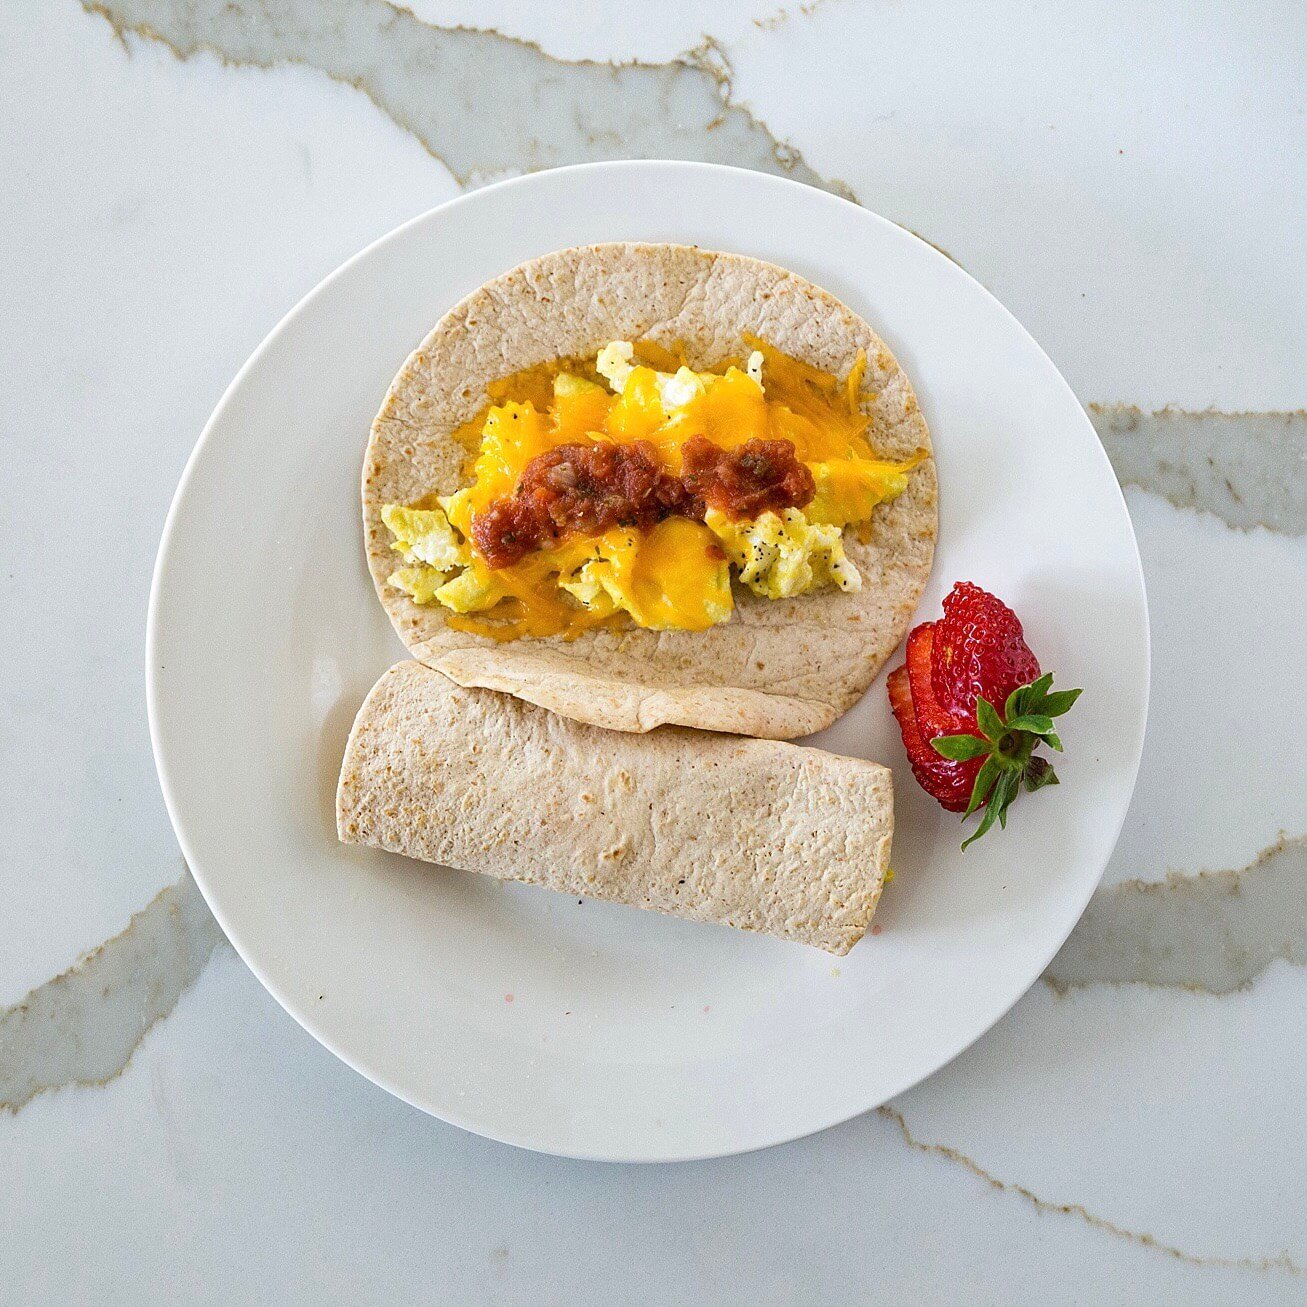 BTD Weekly Meal Plan featuring egg and cheese breakfast tacos